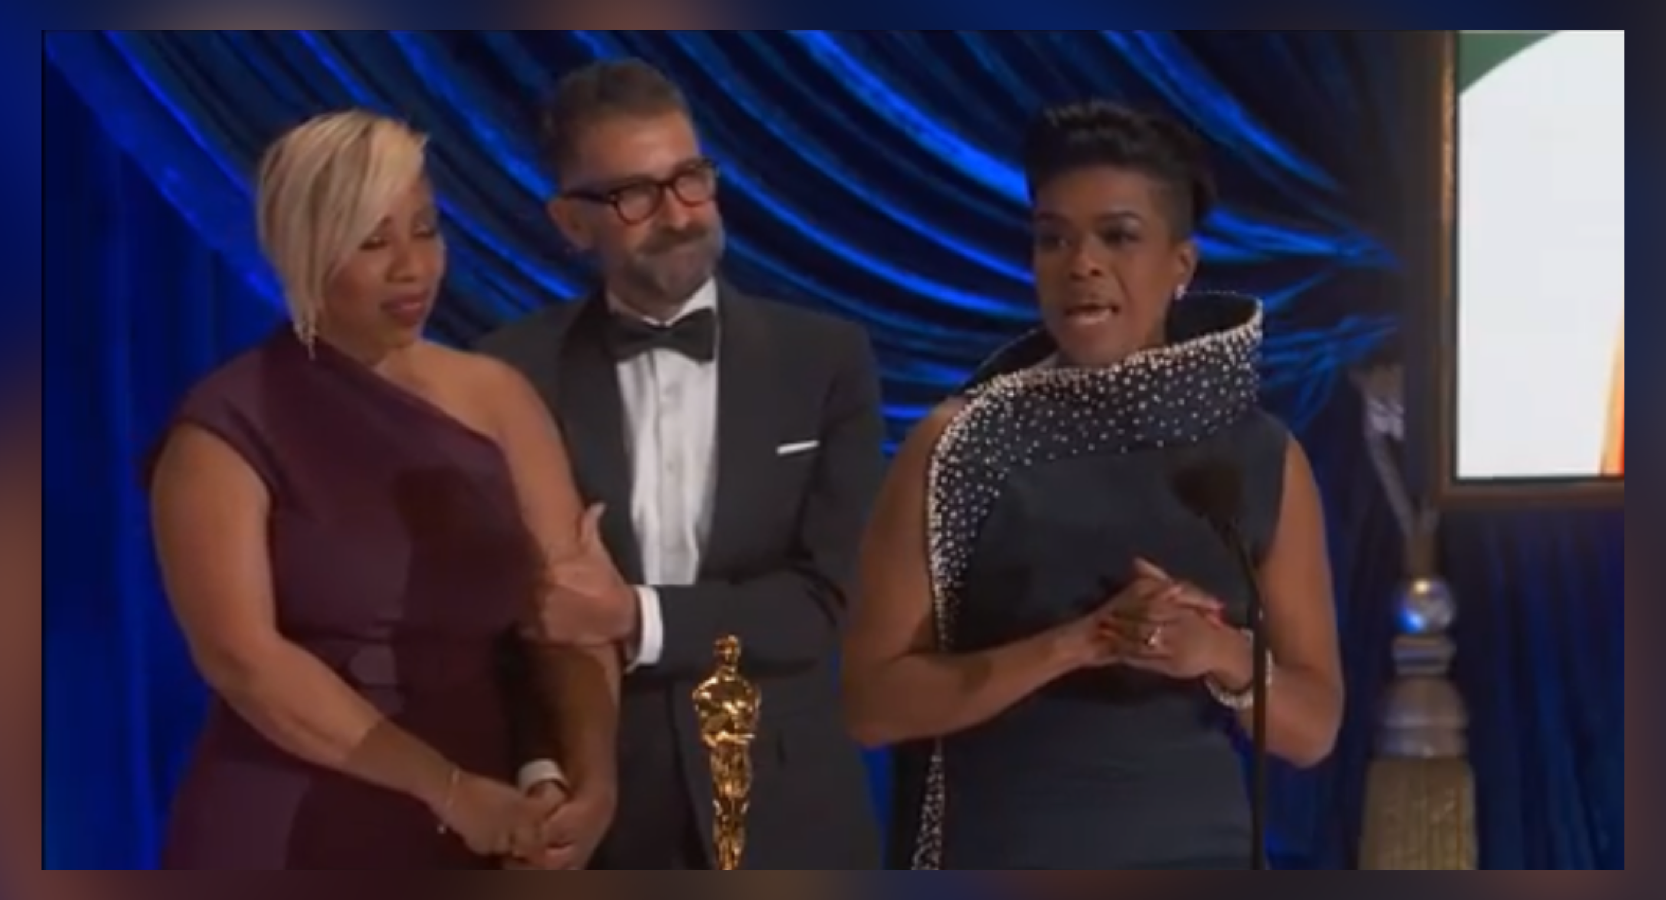 Mia Neal (right) accepting the Academy Award for Hair and Makeup alongside Jamika Wilson and Sergio Lopez-Rivera